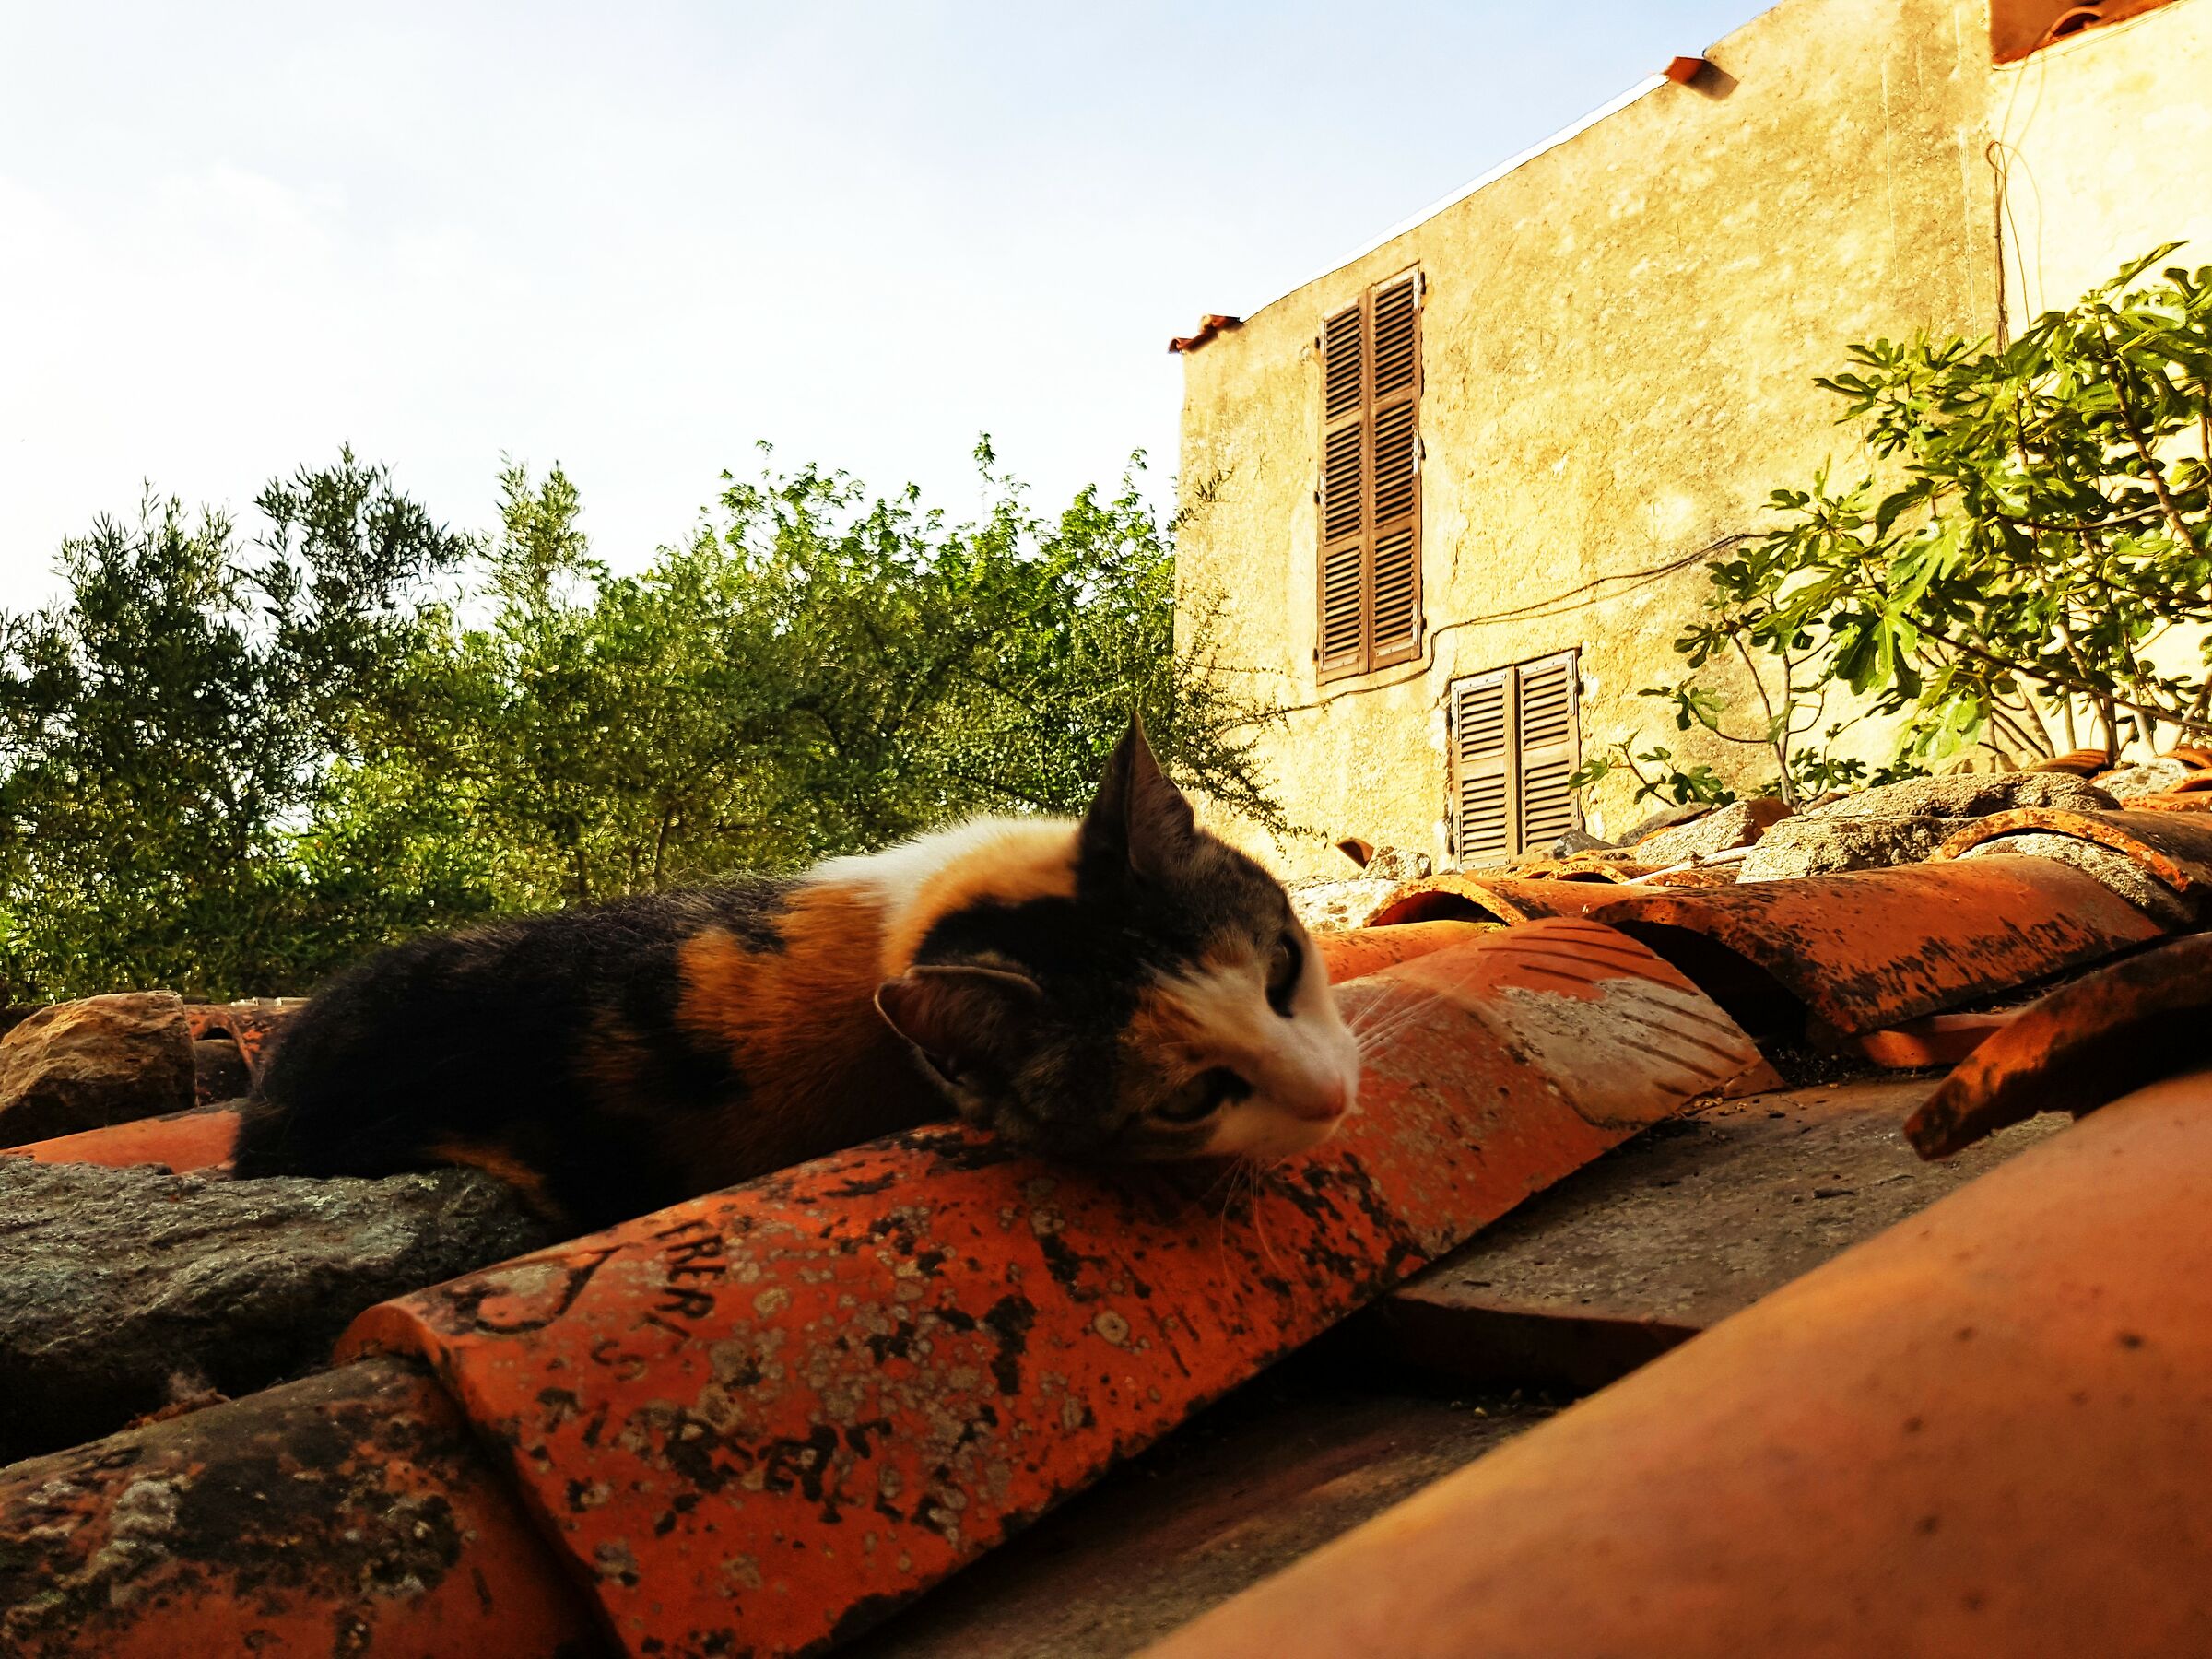 The cat on the hot roof...